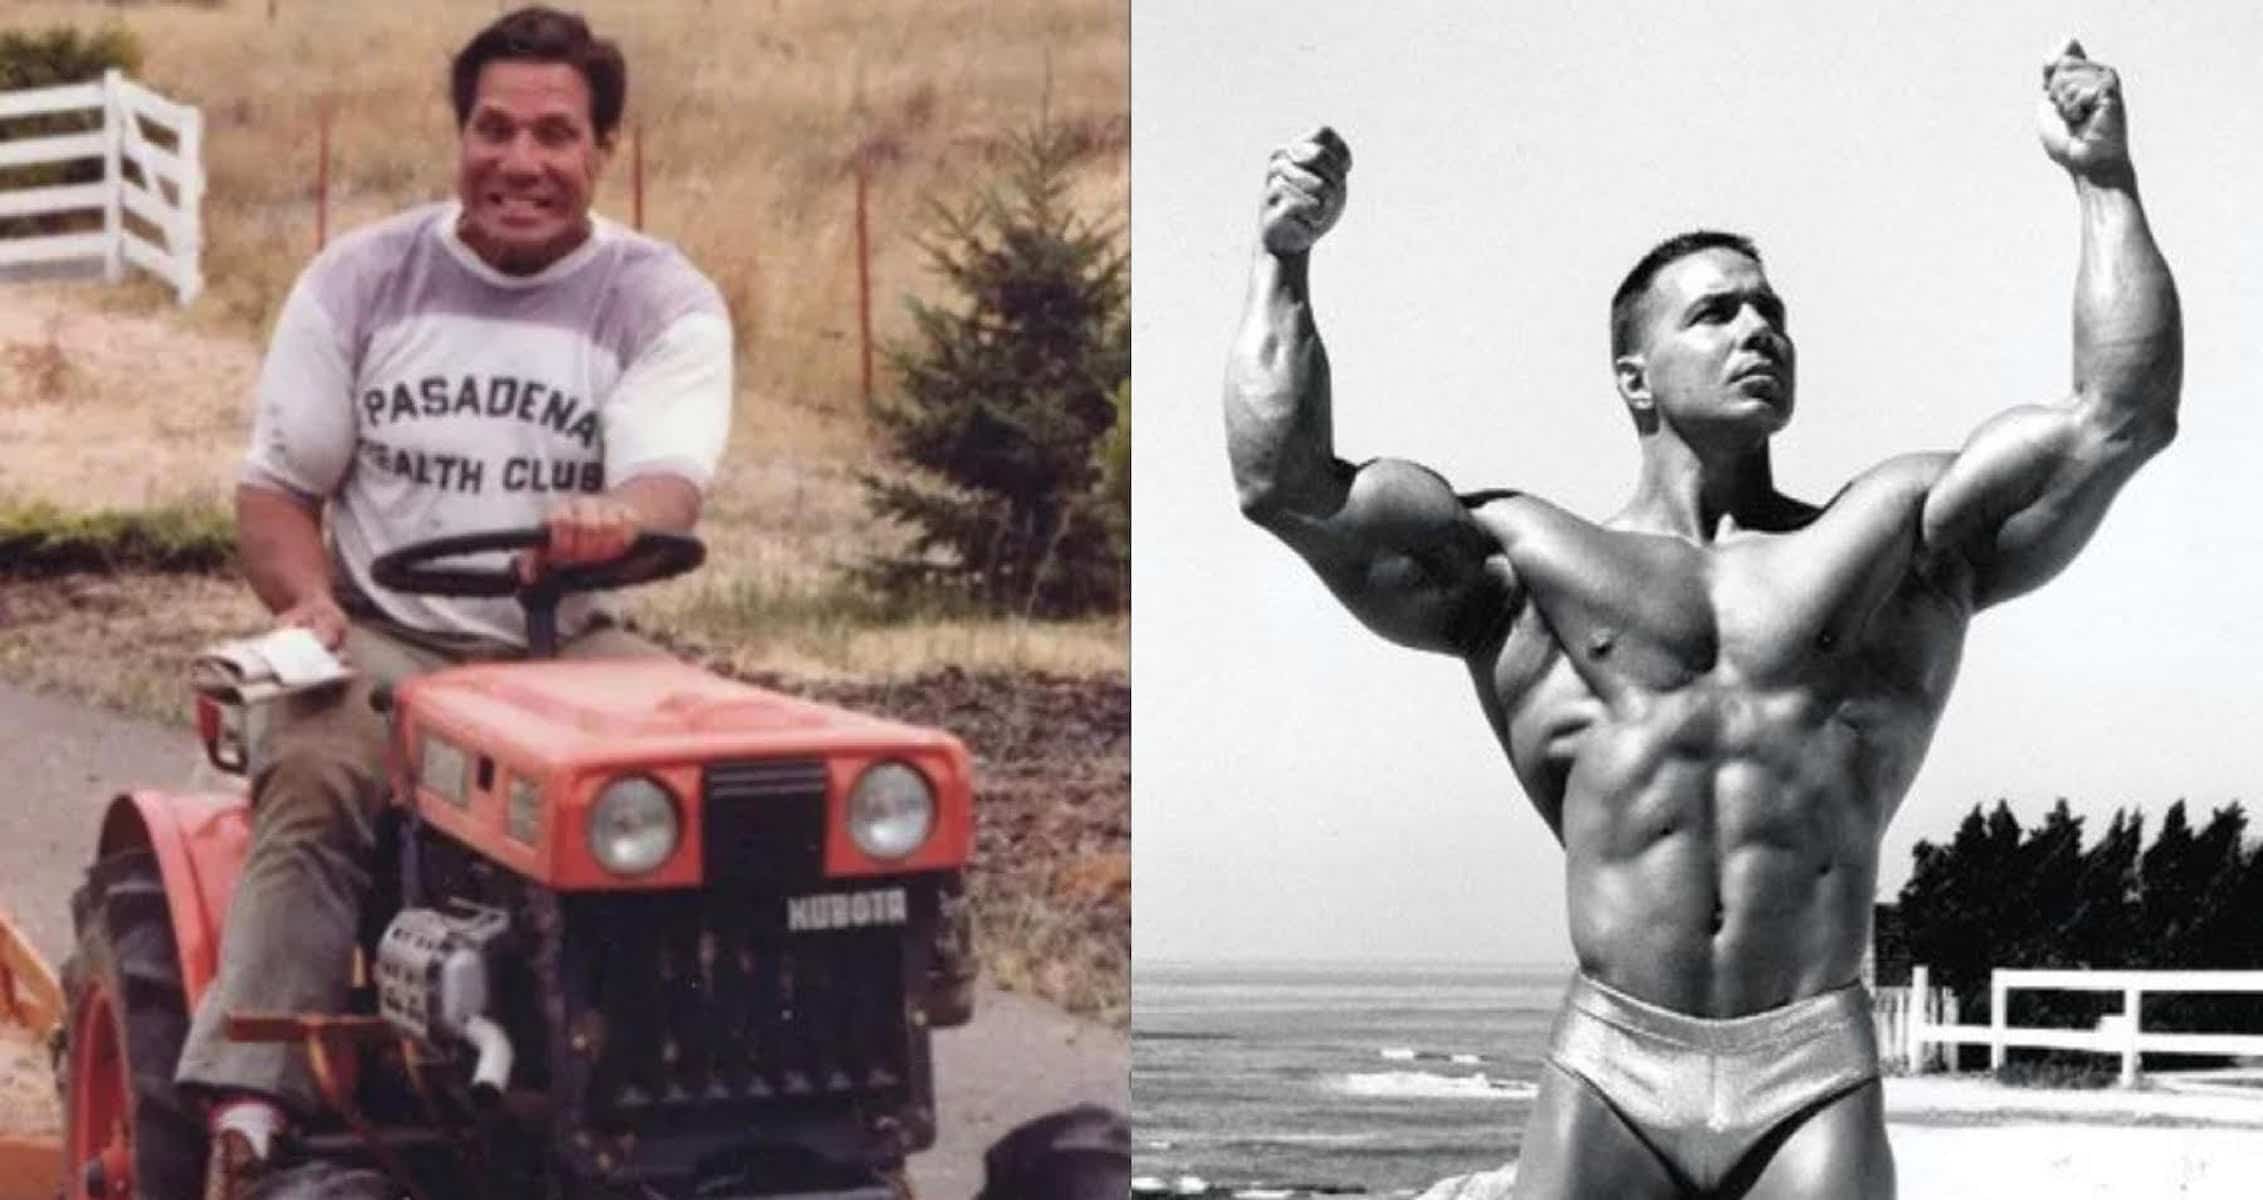 Bodybuilding Legend Bill Pearl Recovering From Back Surgery After Scary Accident Involving Riding Mower